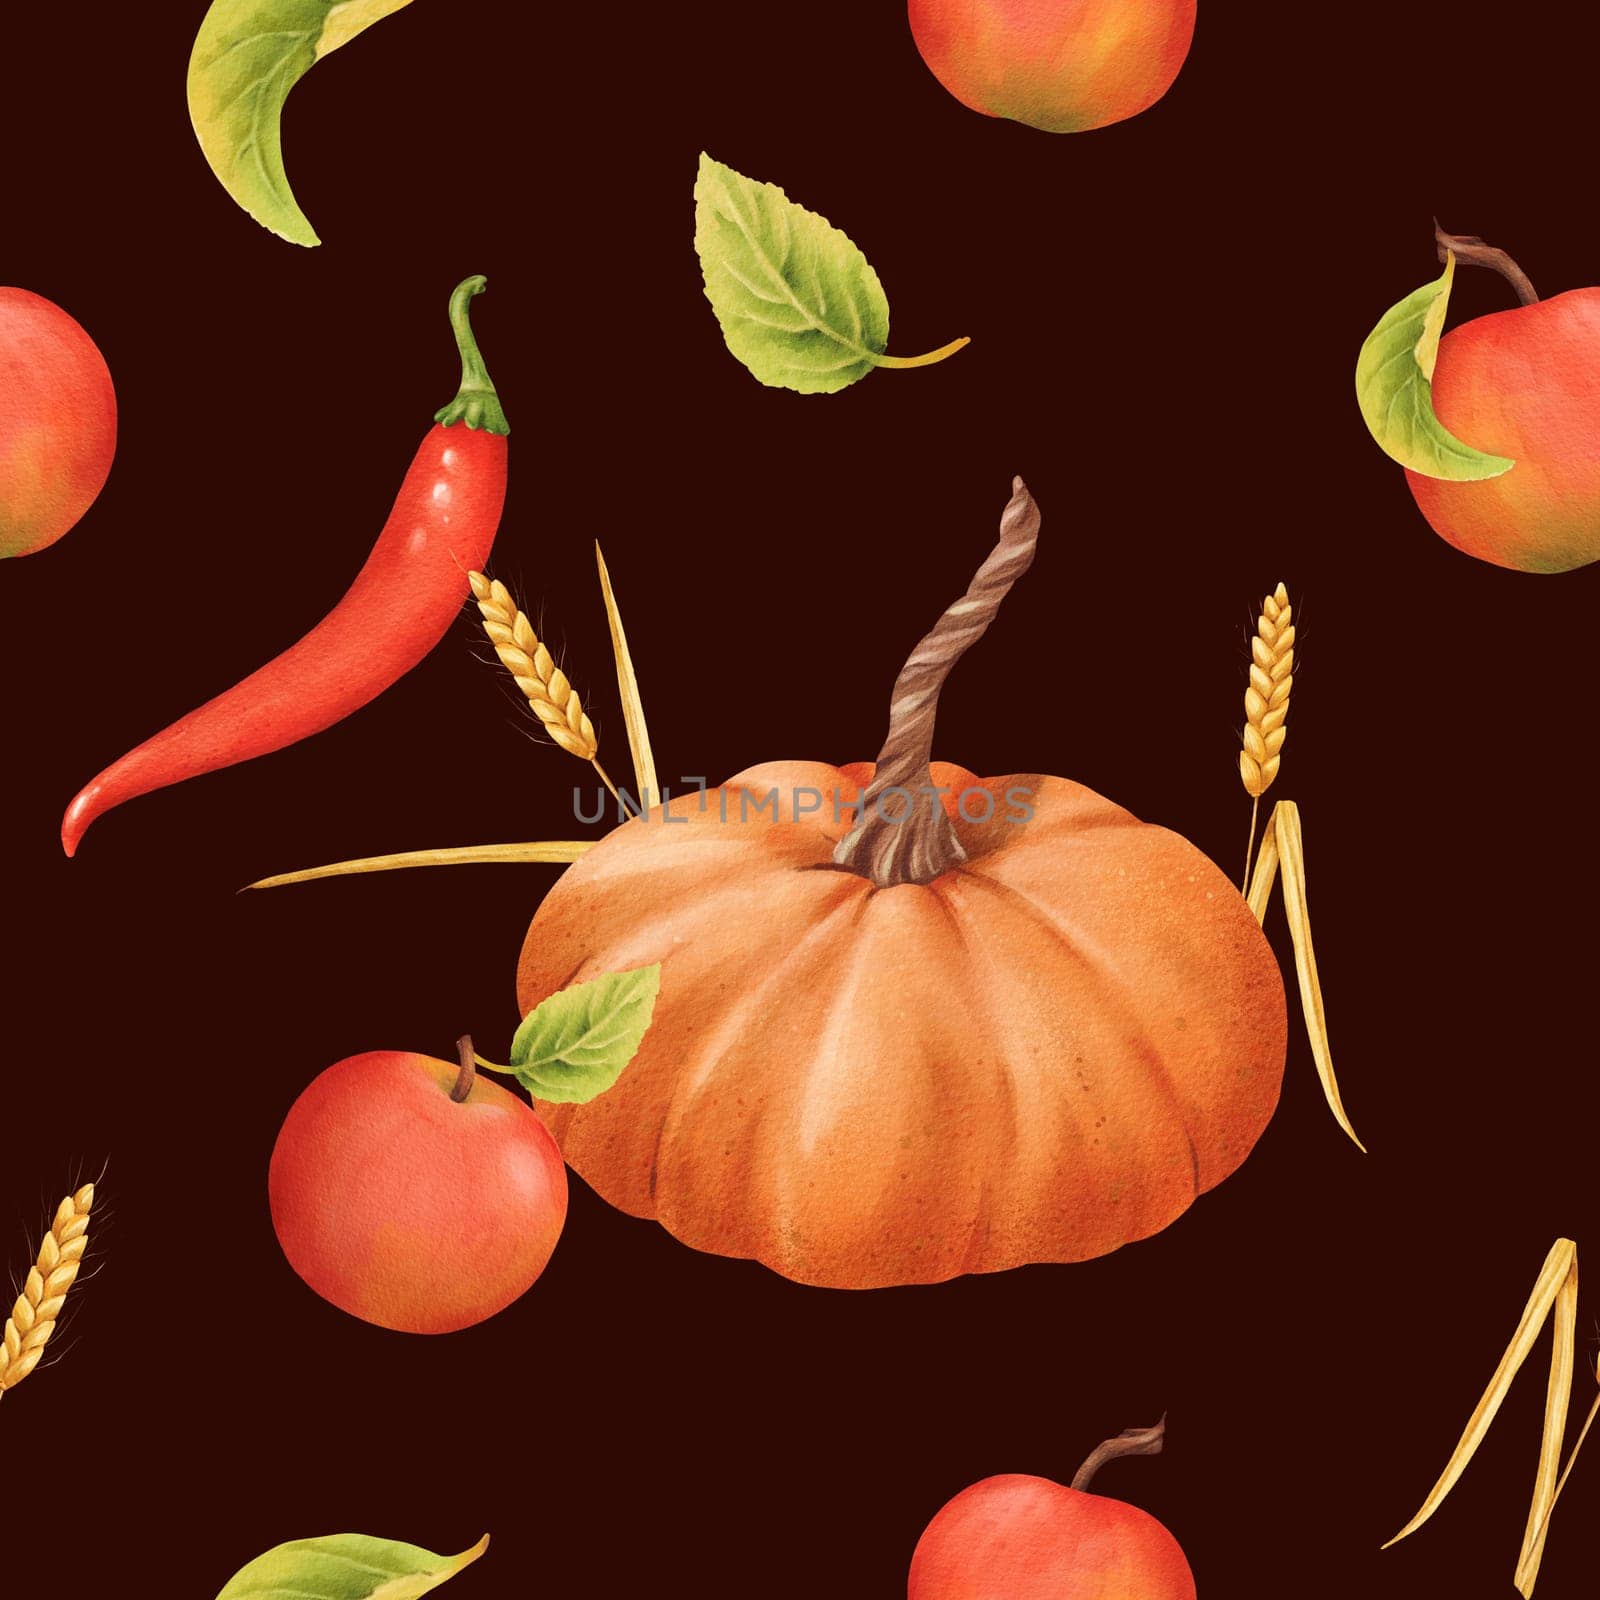 Seamless pattern of Pumpkins, apples, leaves, chili and spikelets. Watercolor illustration. Autumn harvest. Delicious ripe vegetable. Vegetarian raw food. For posters, websites, notebooks, textbooks.